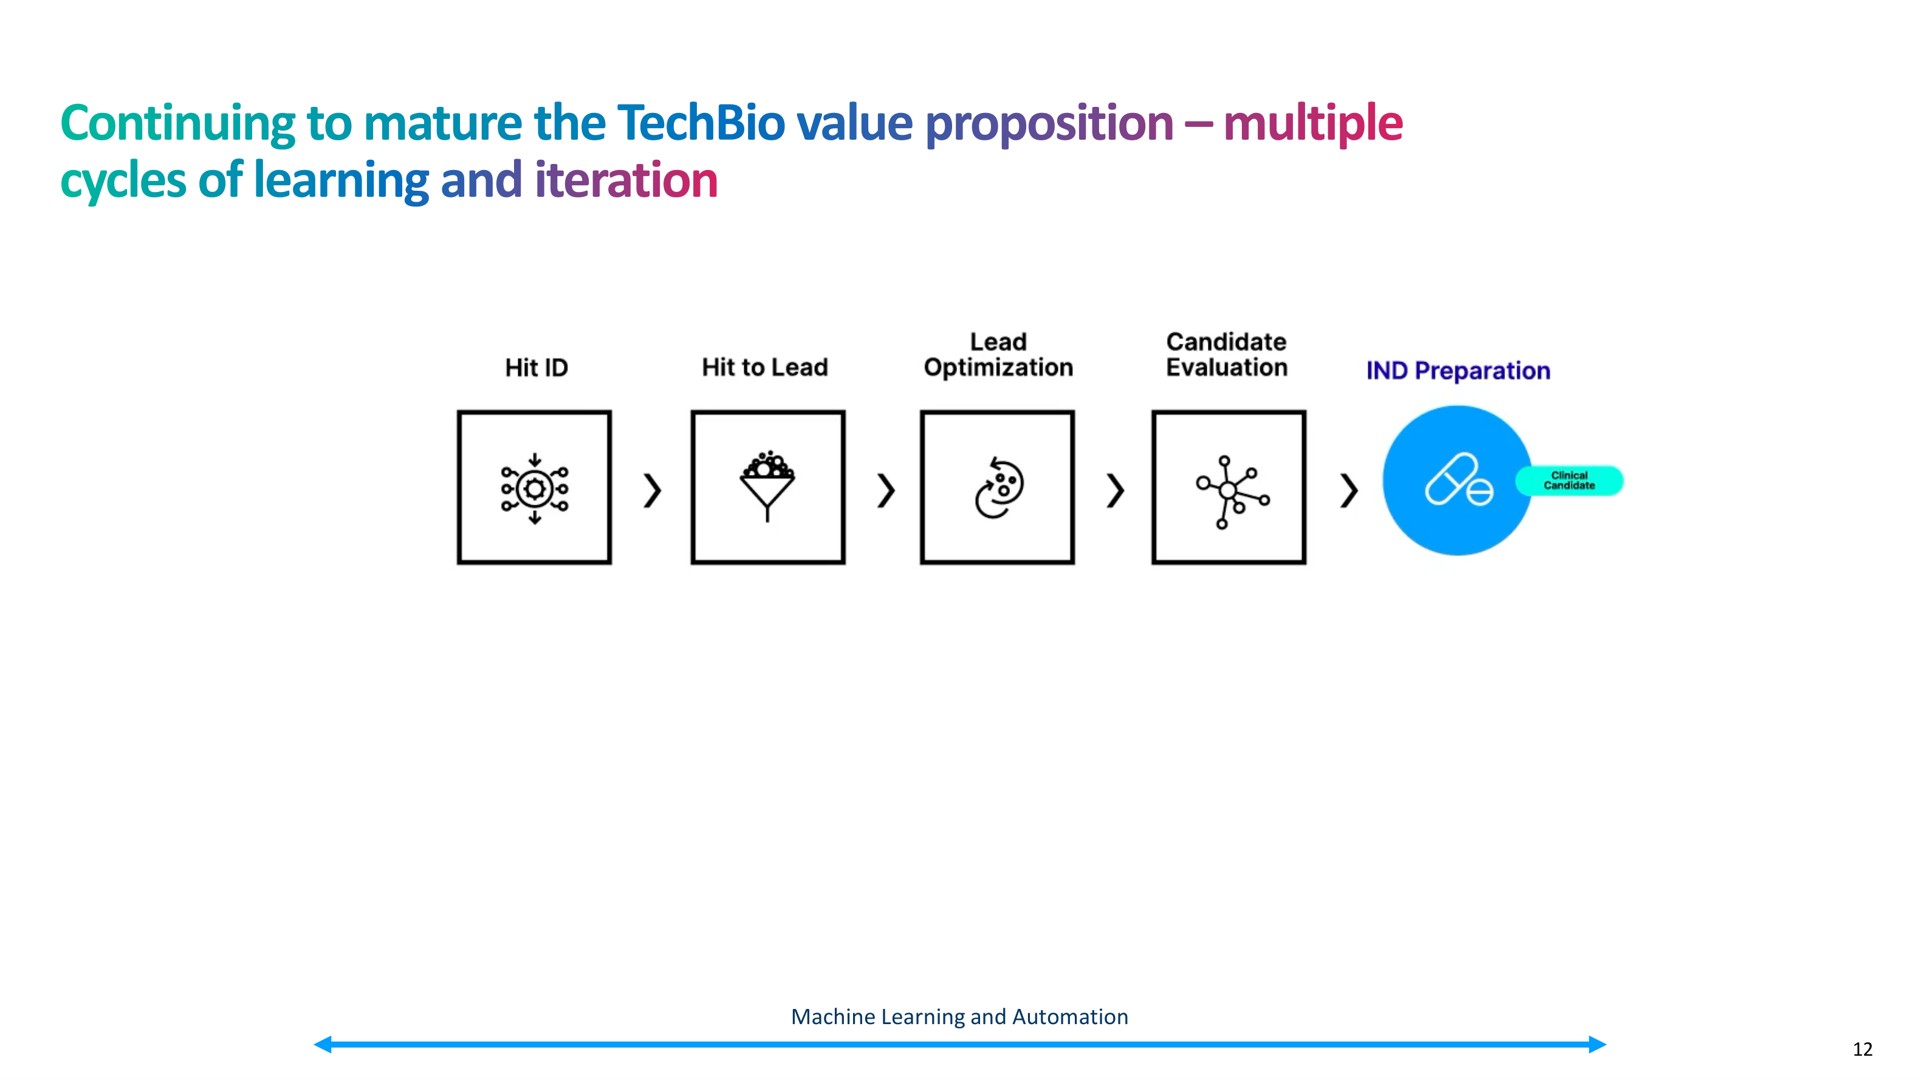 continuing to mature the value proposition multiple cycles of learning and iteration | Recursion Pharmaceuticals